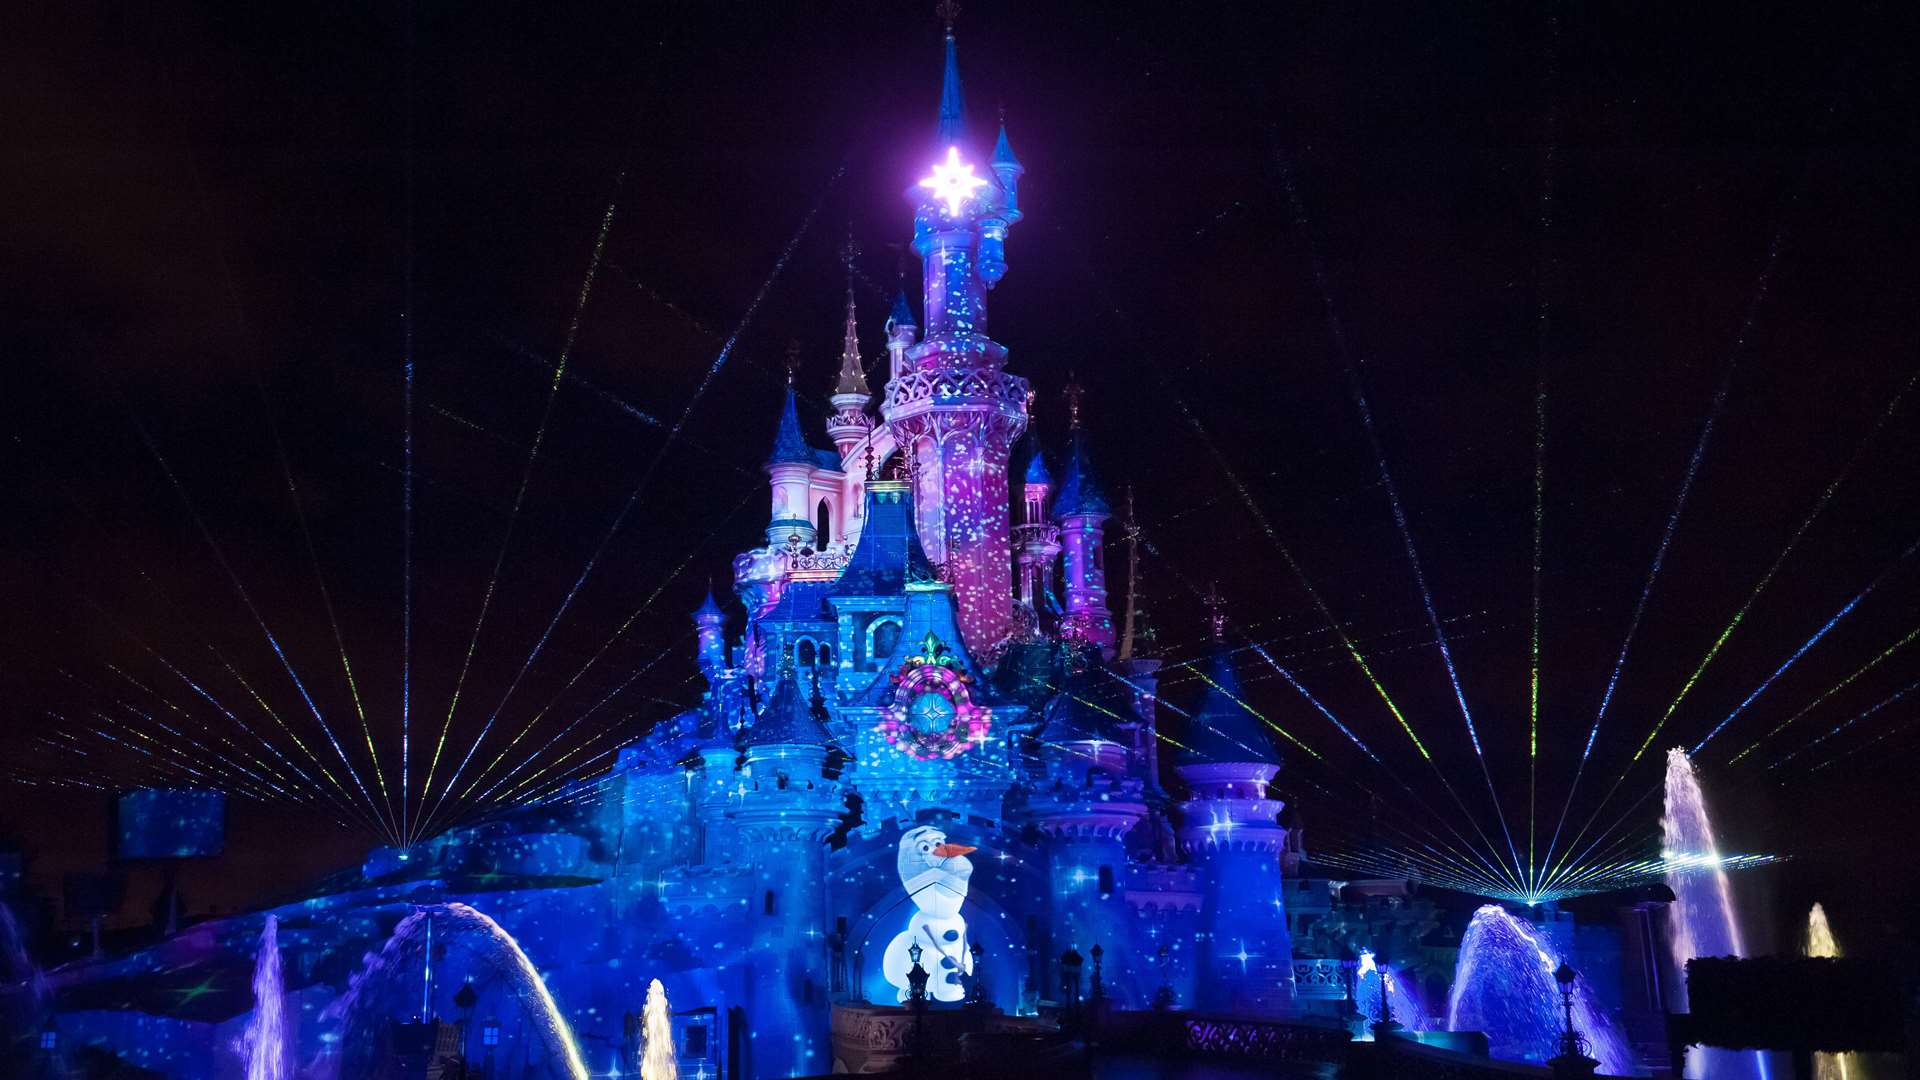 Disney Dreams at Christmas show lights up the castle